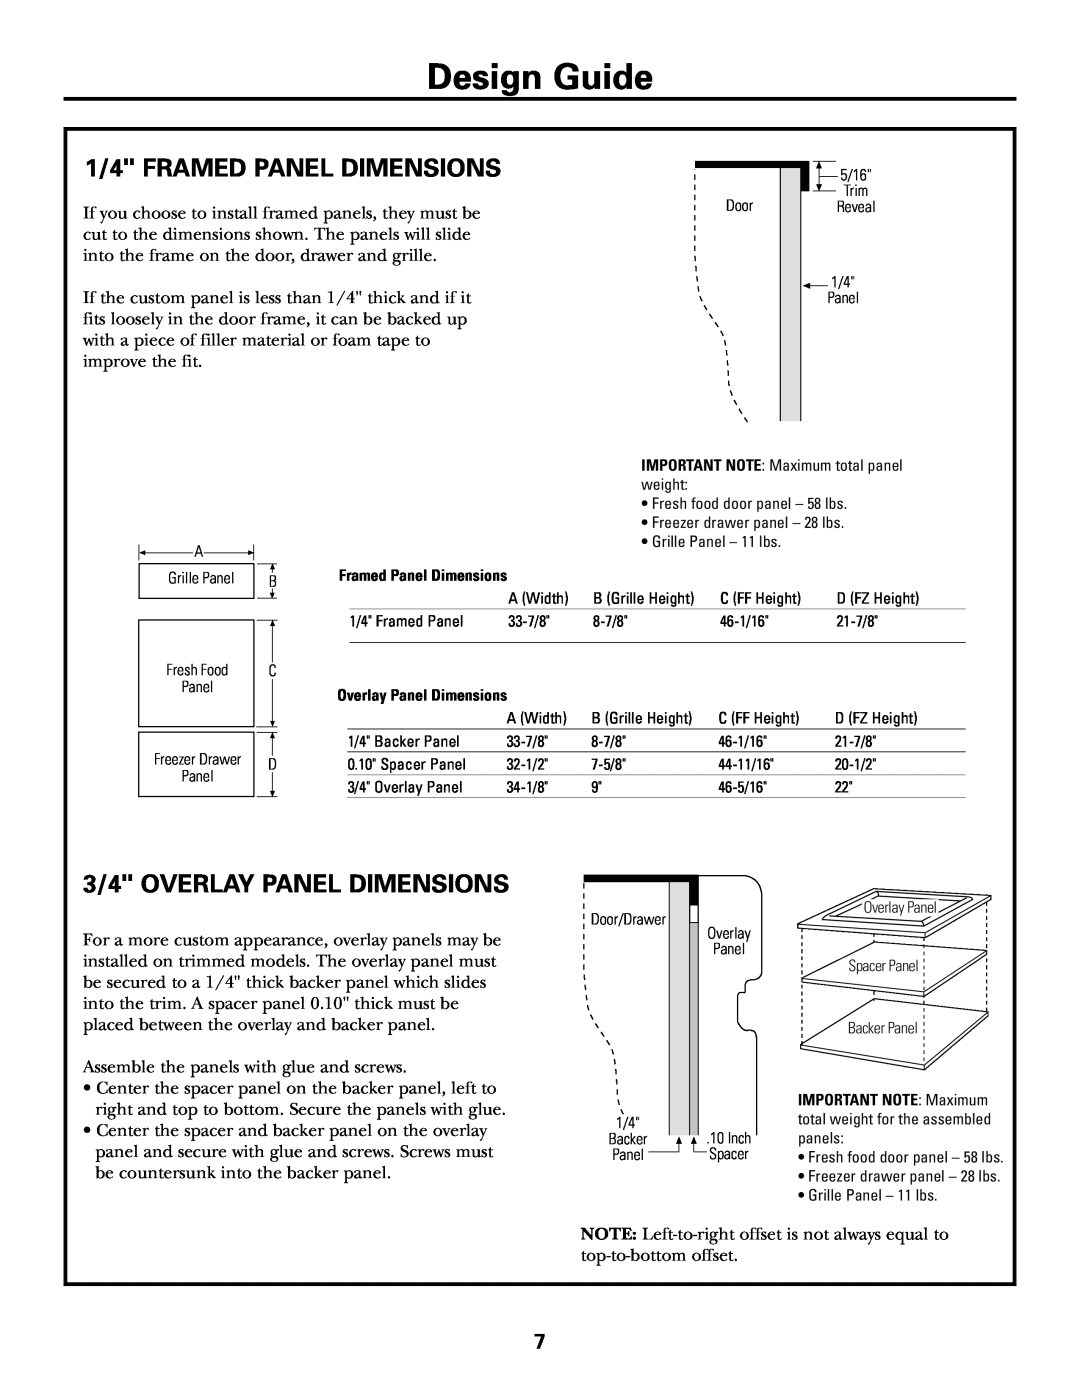 GE Monogram ZICS360 LH installation instructions 1/4 FRAMED PANEL DIMENSIONS, 3/4 OVERLAY PANEL DIMENSIONS, Design Guide 